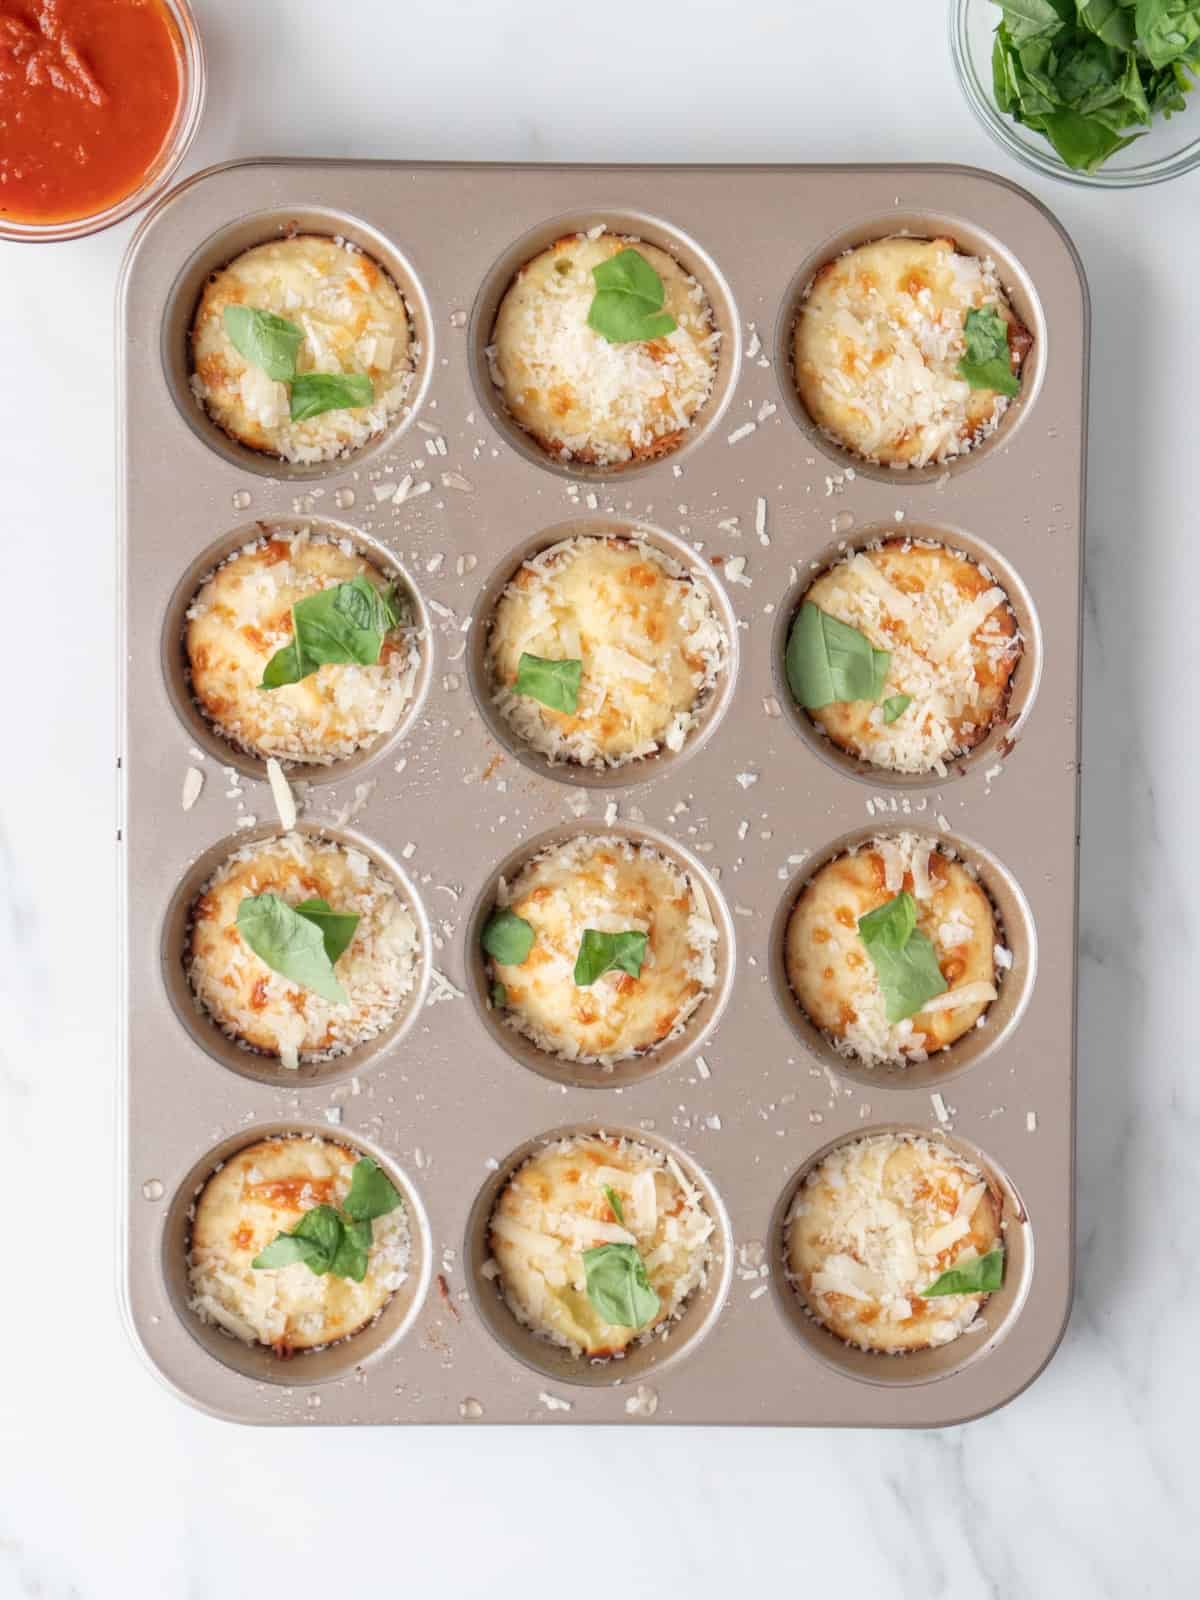 A muffin pan with 12 cheese pizza bites baked, garnished with basil leaves, sea salt and shredded parmesan, with two small glass bowls of basil leaves and marinara on the side.